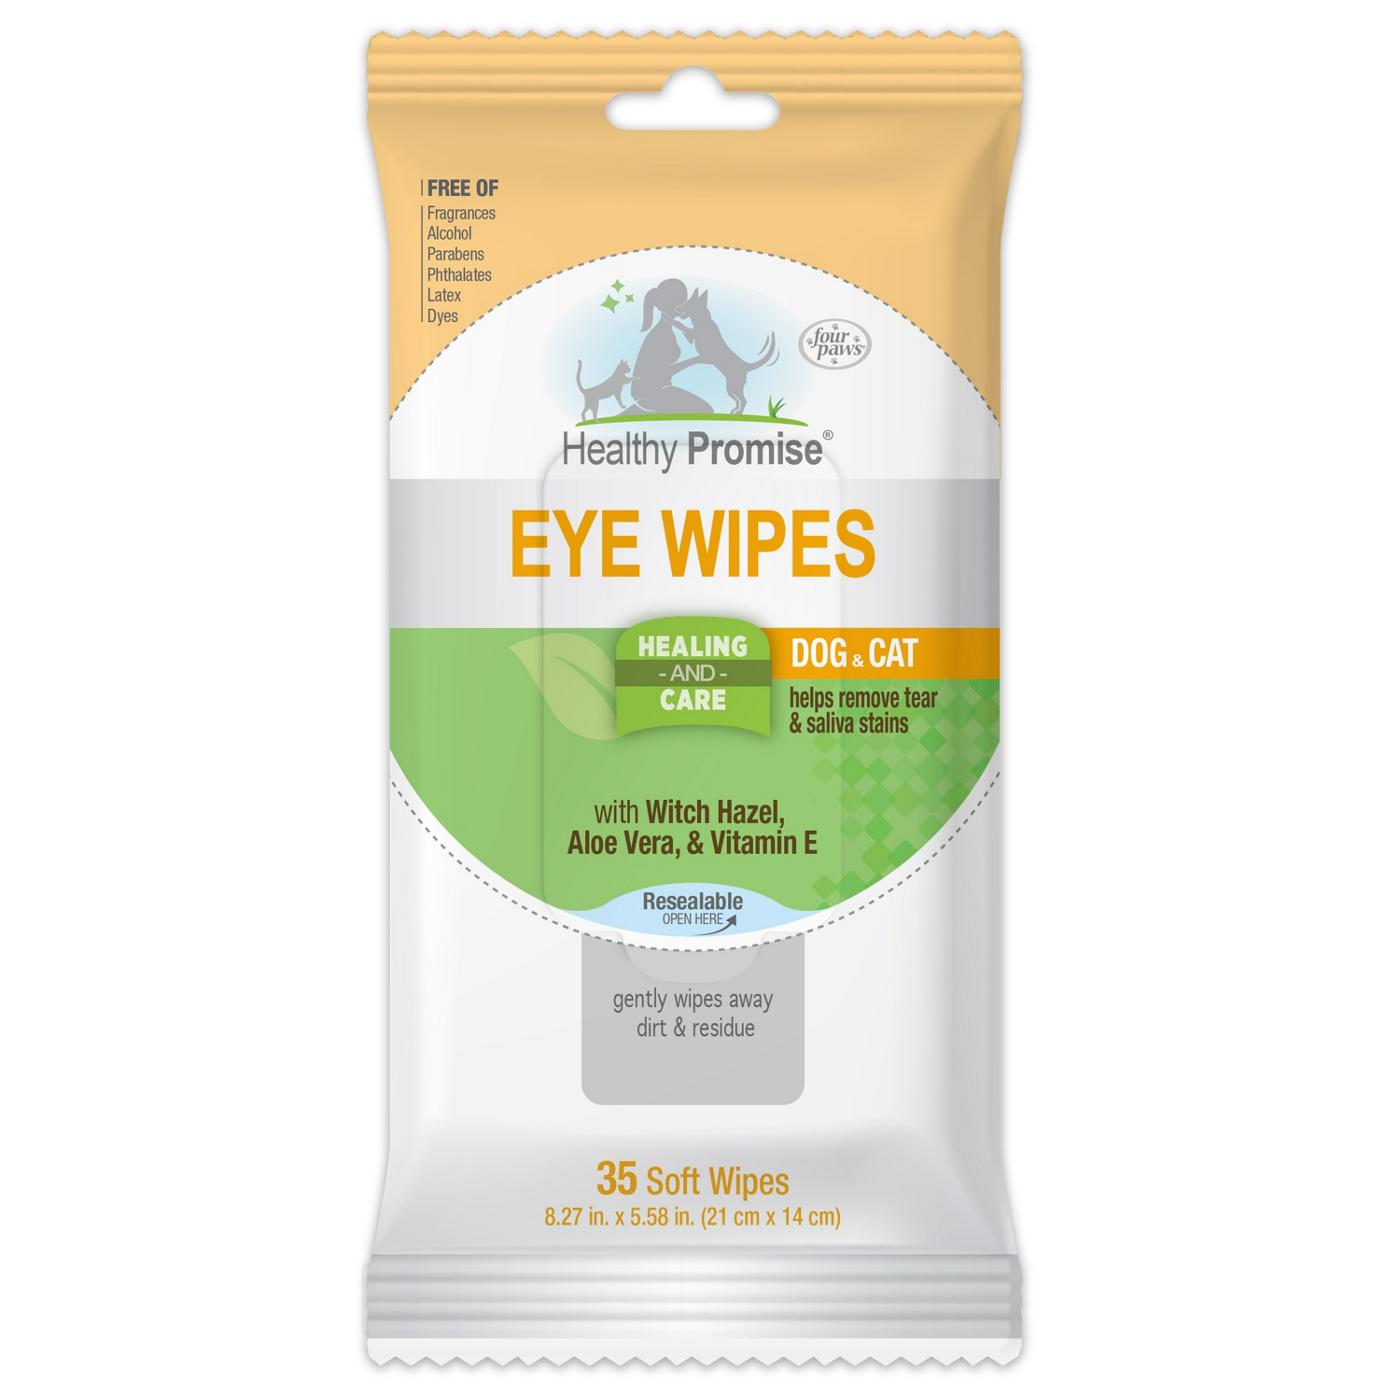 Healthy Promise Eye Wipes For Dogs & Cats; image 1 of 8